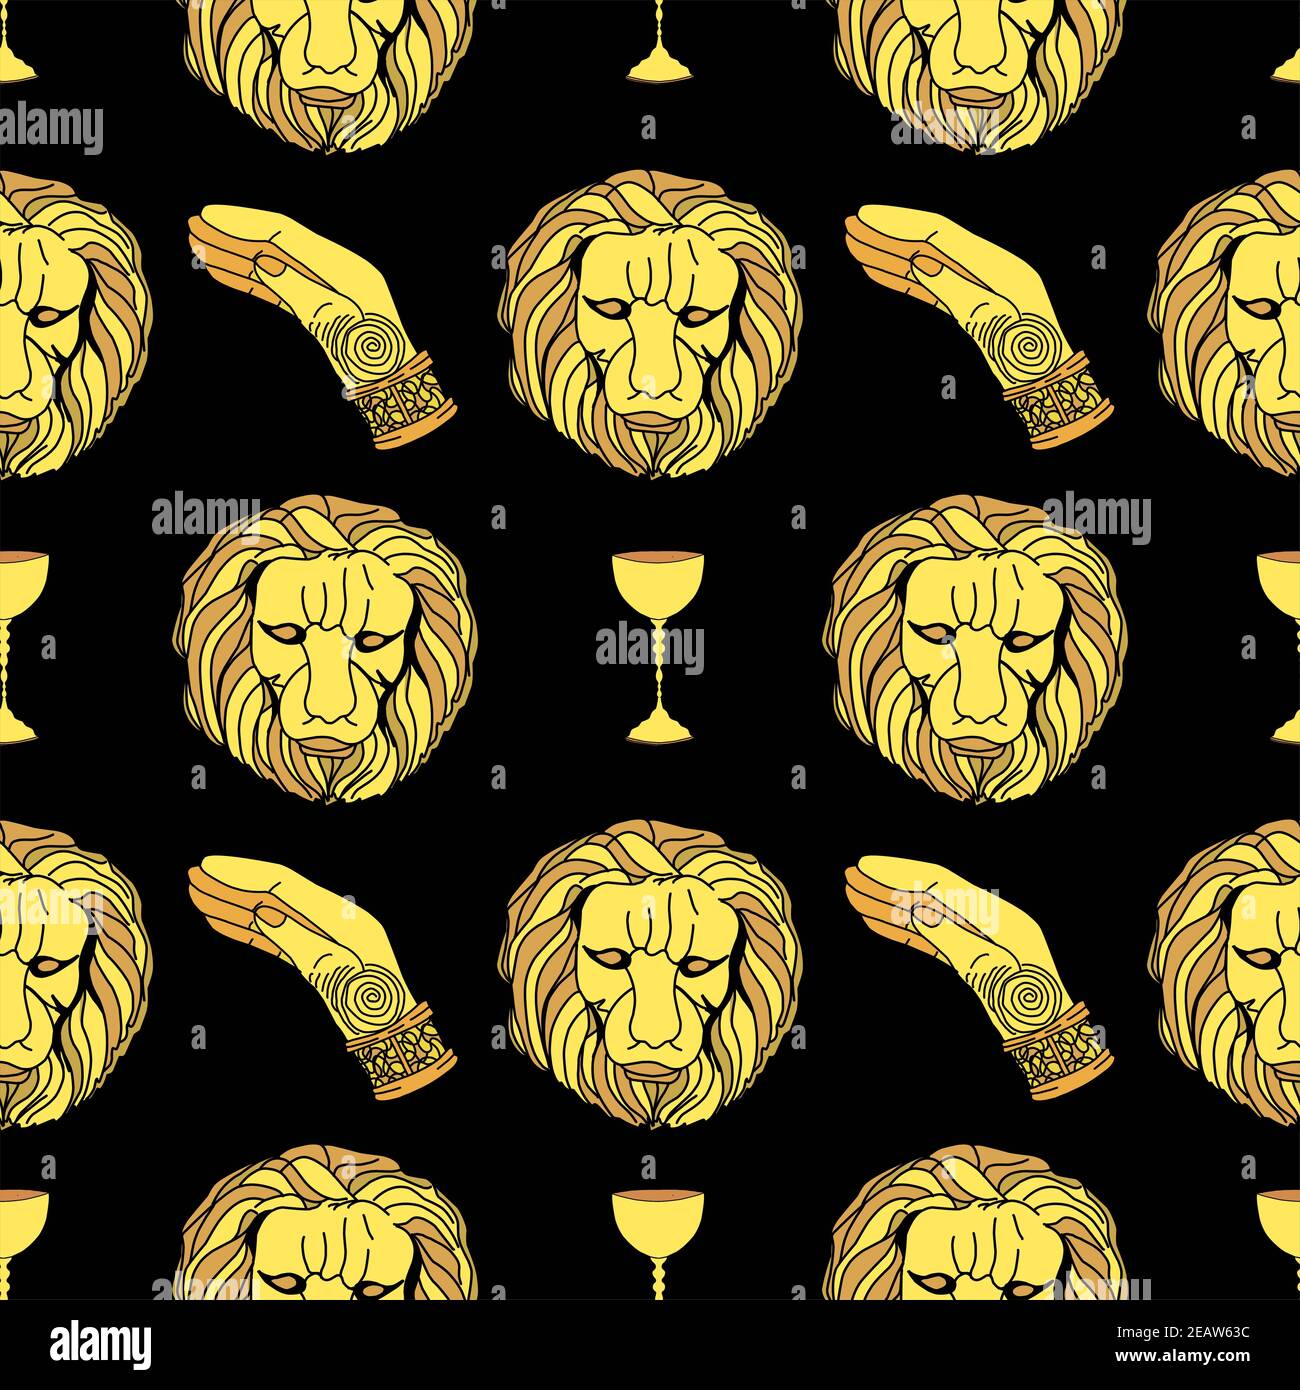 pattern mysticism and magic. Lion head and golden hand. Black background. Halloween background. Stock Photo